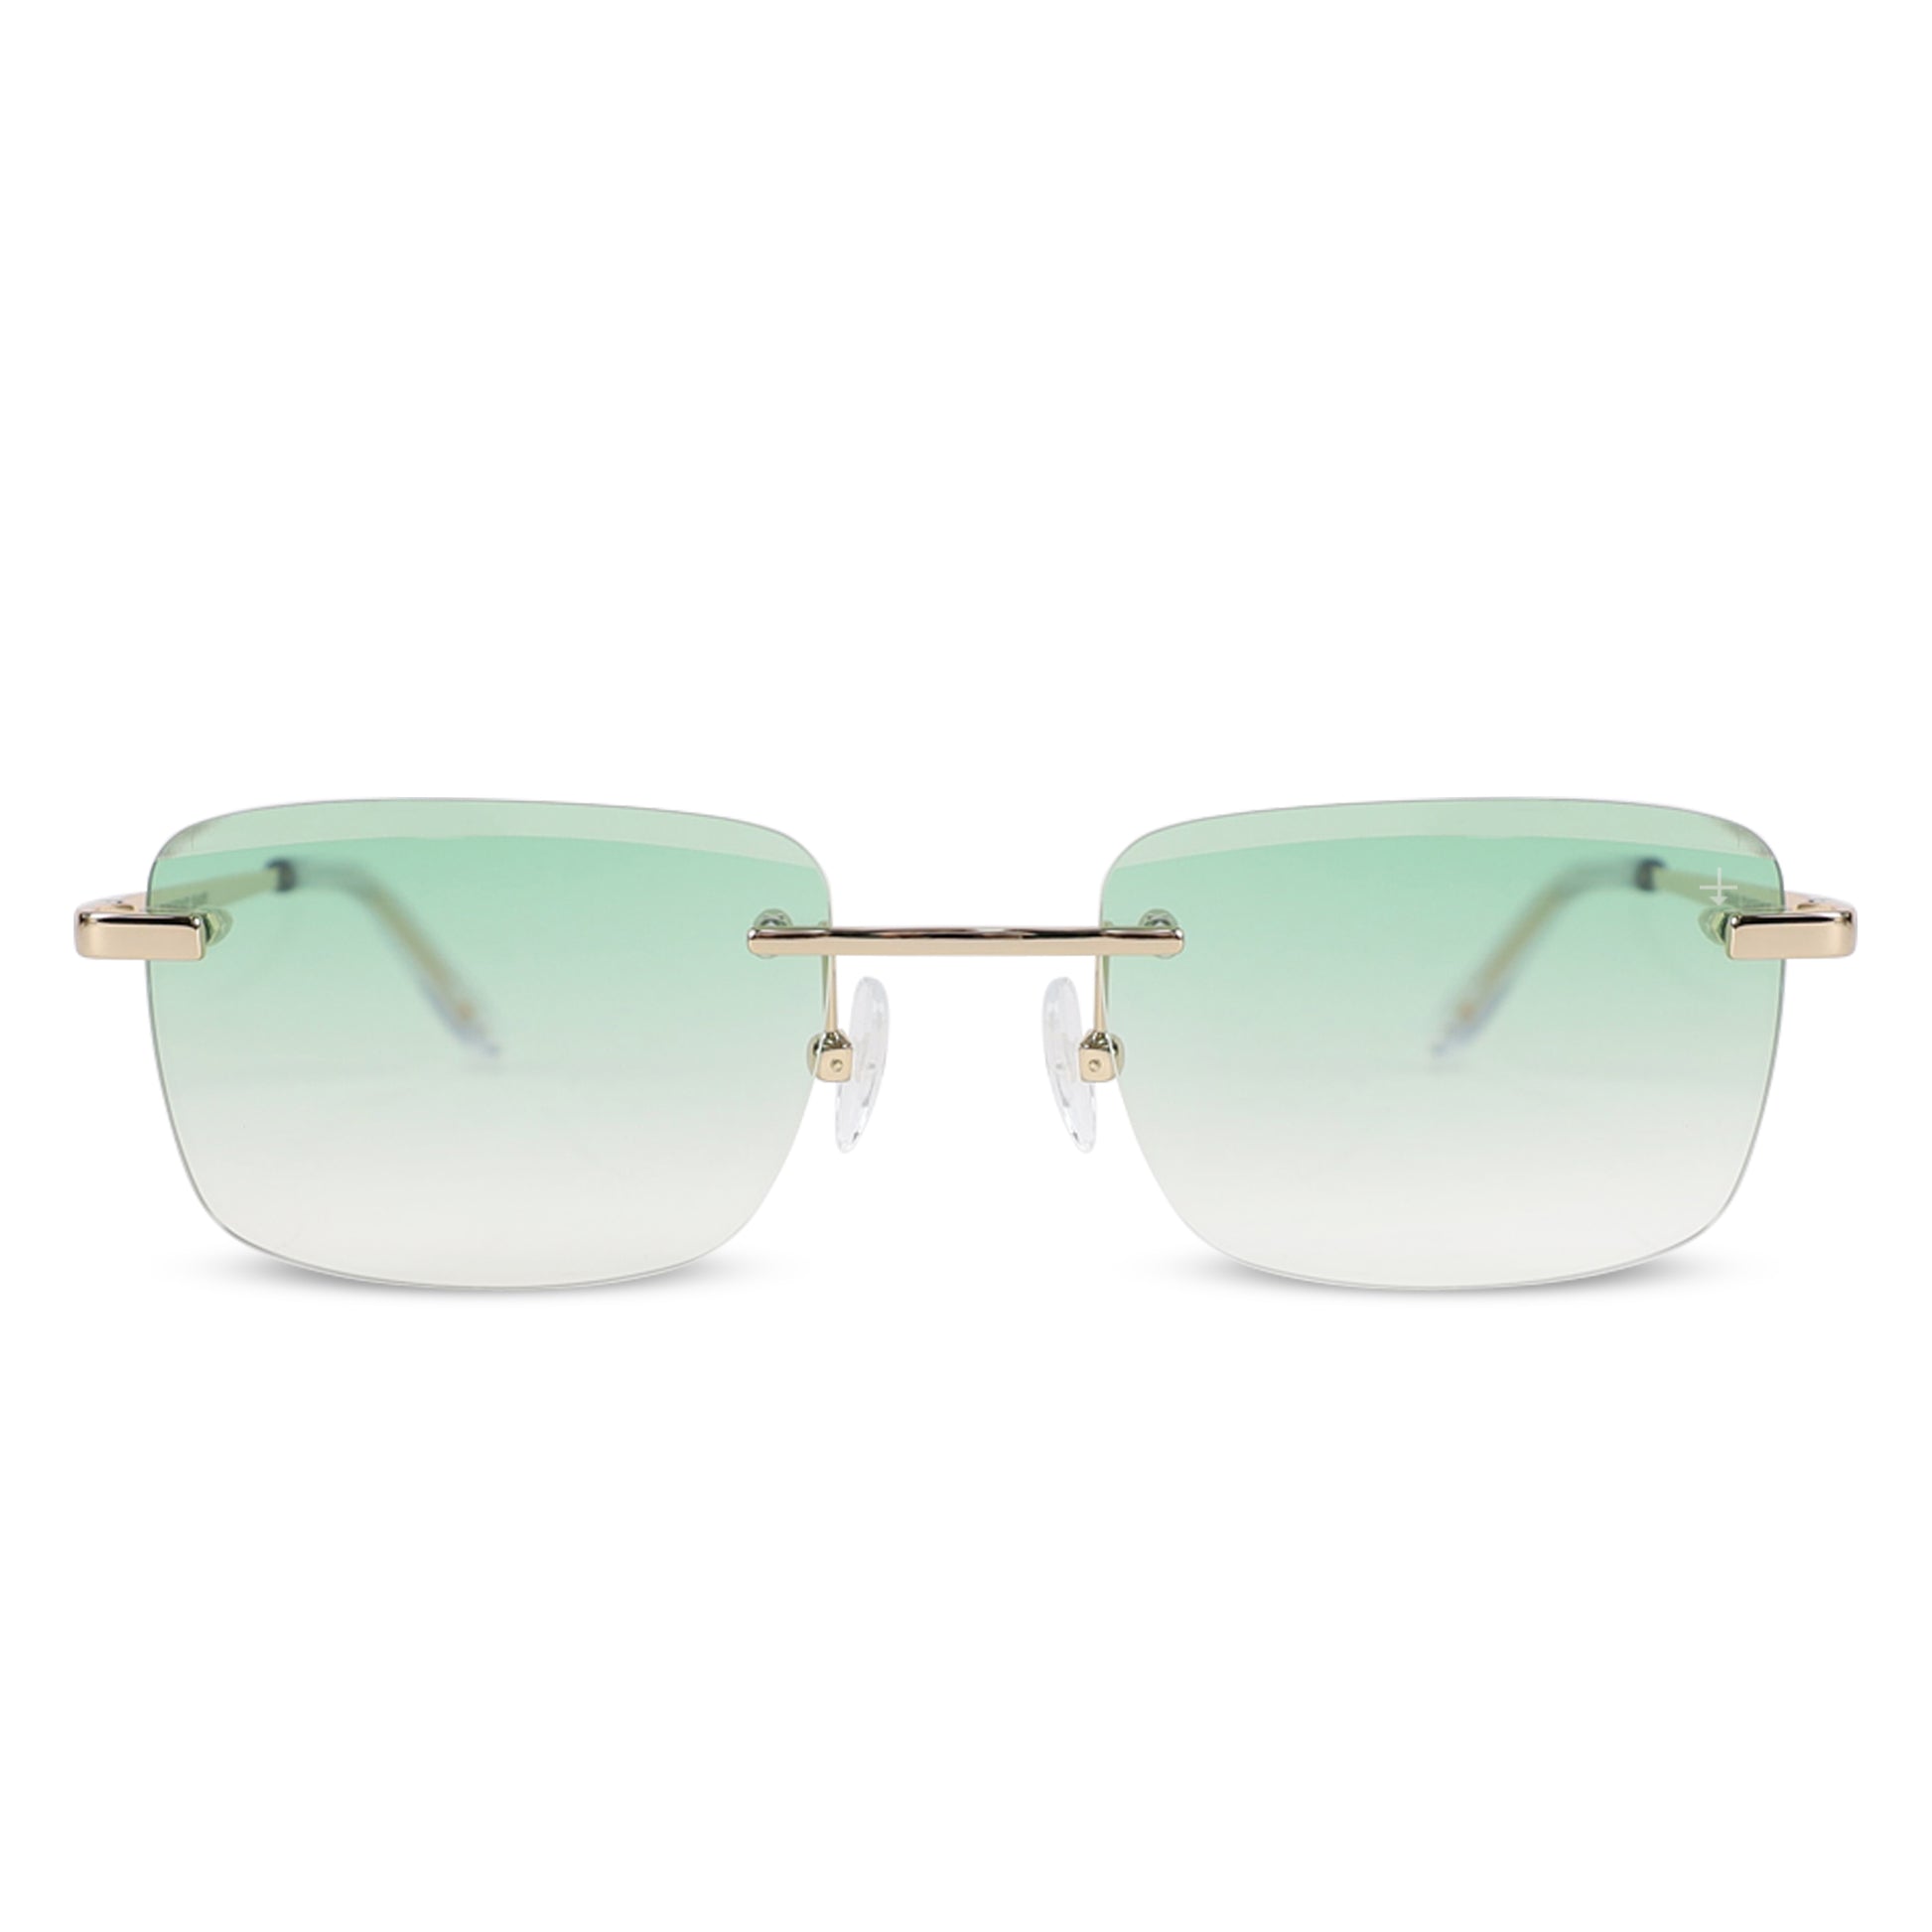 Crystal Green glasses | Lucien Fabrice